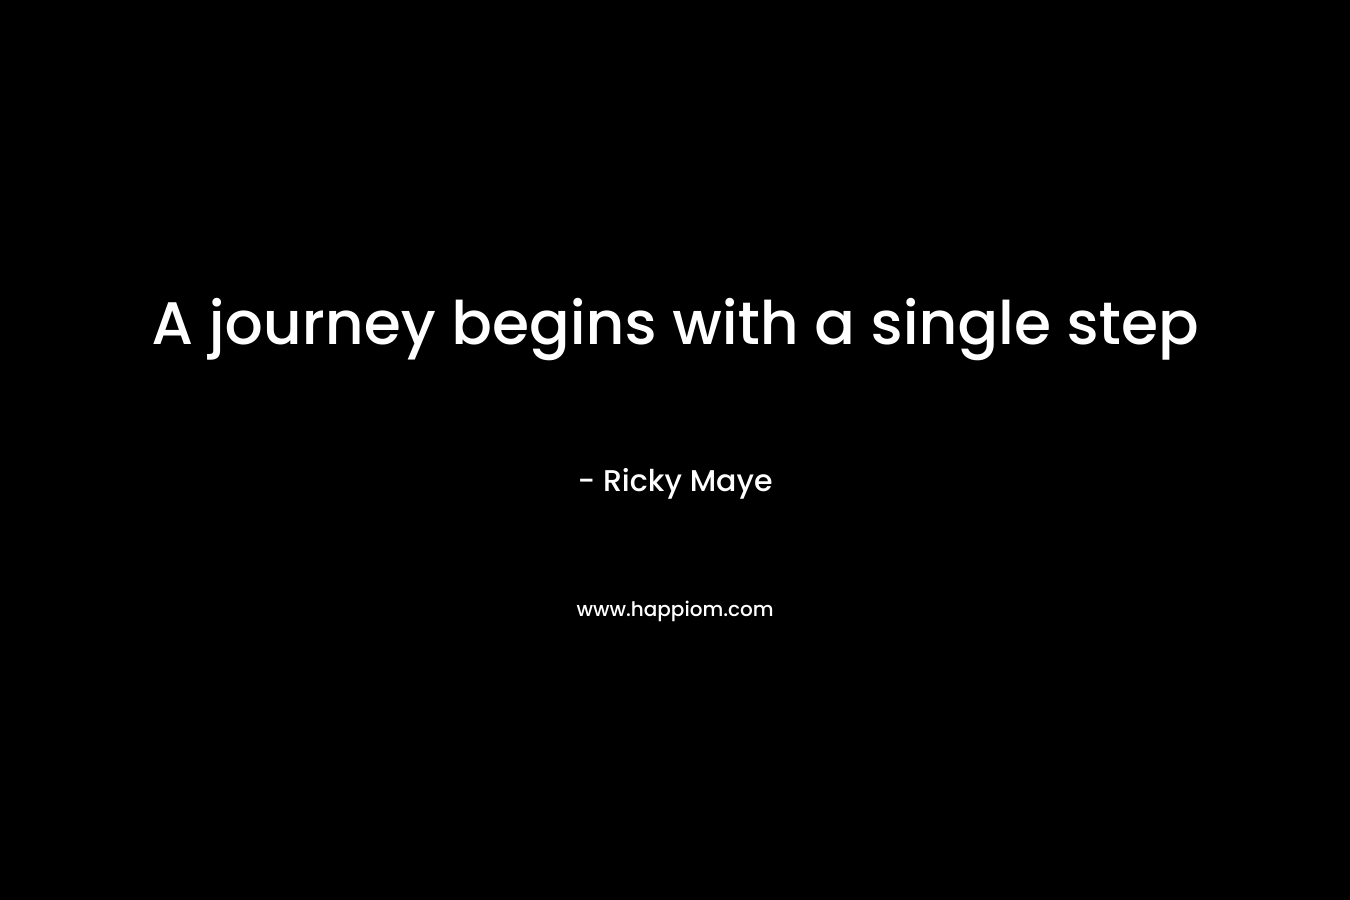 A journey begins with a single step